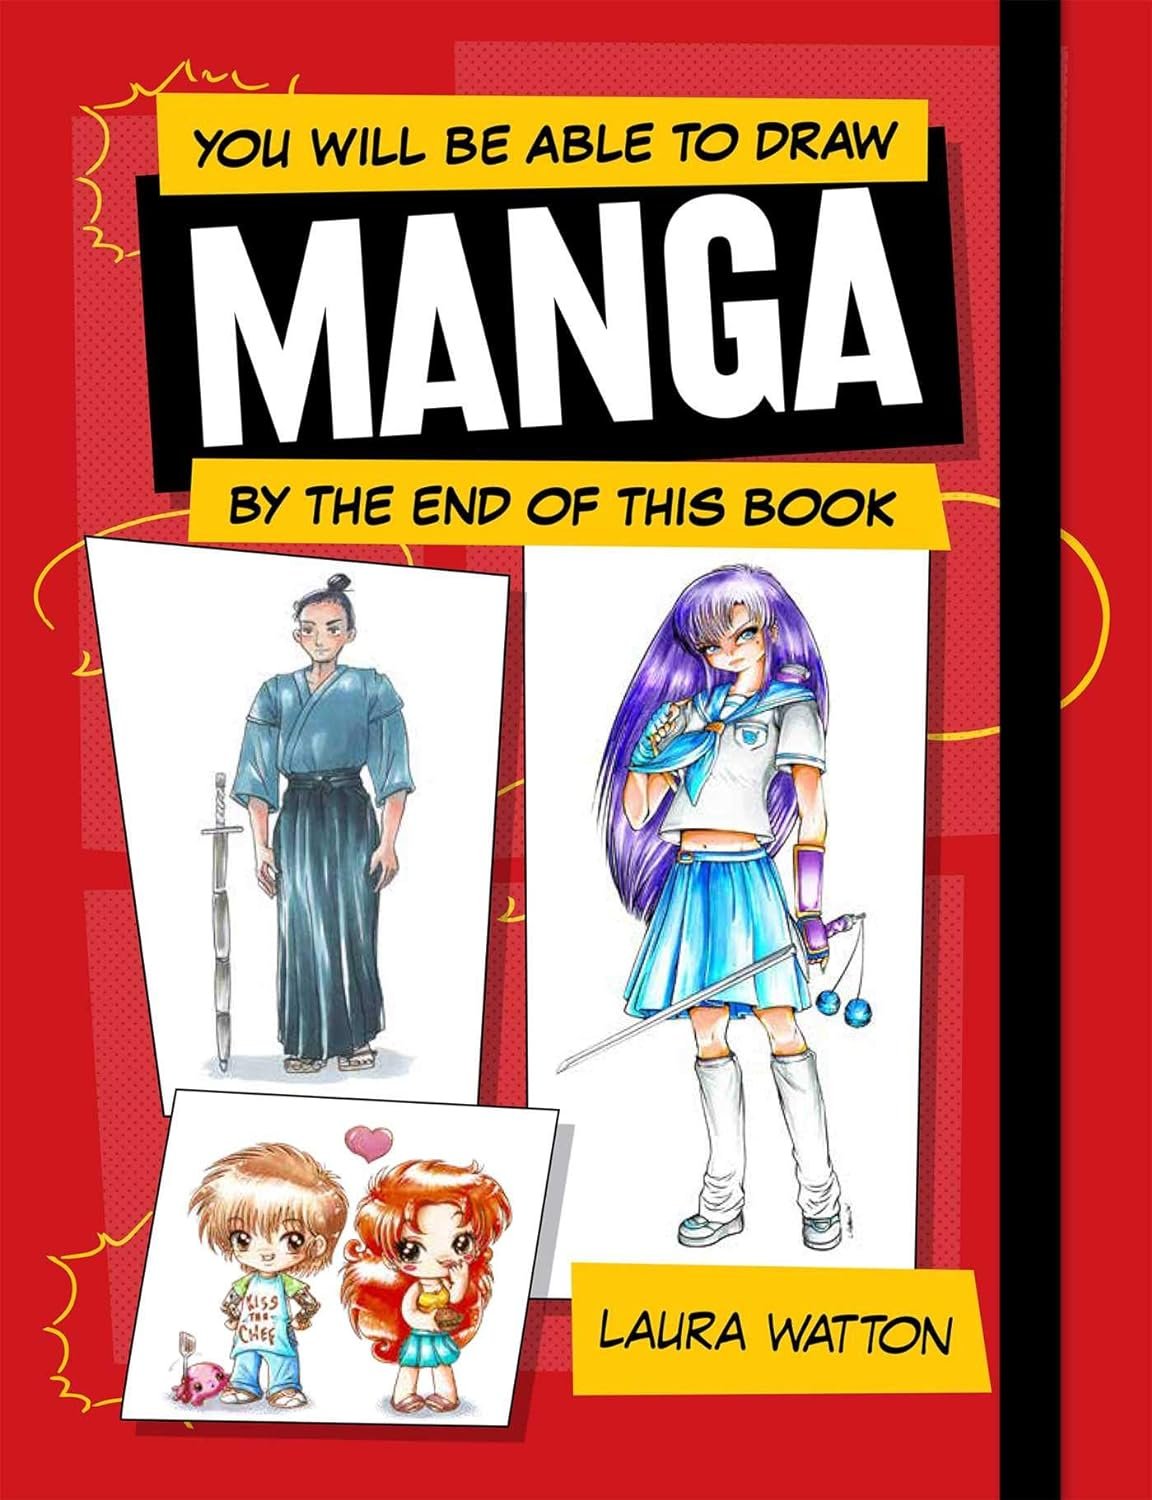 You Will Be Able to Draw Manga by the End of This Book [USA]